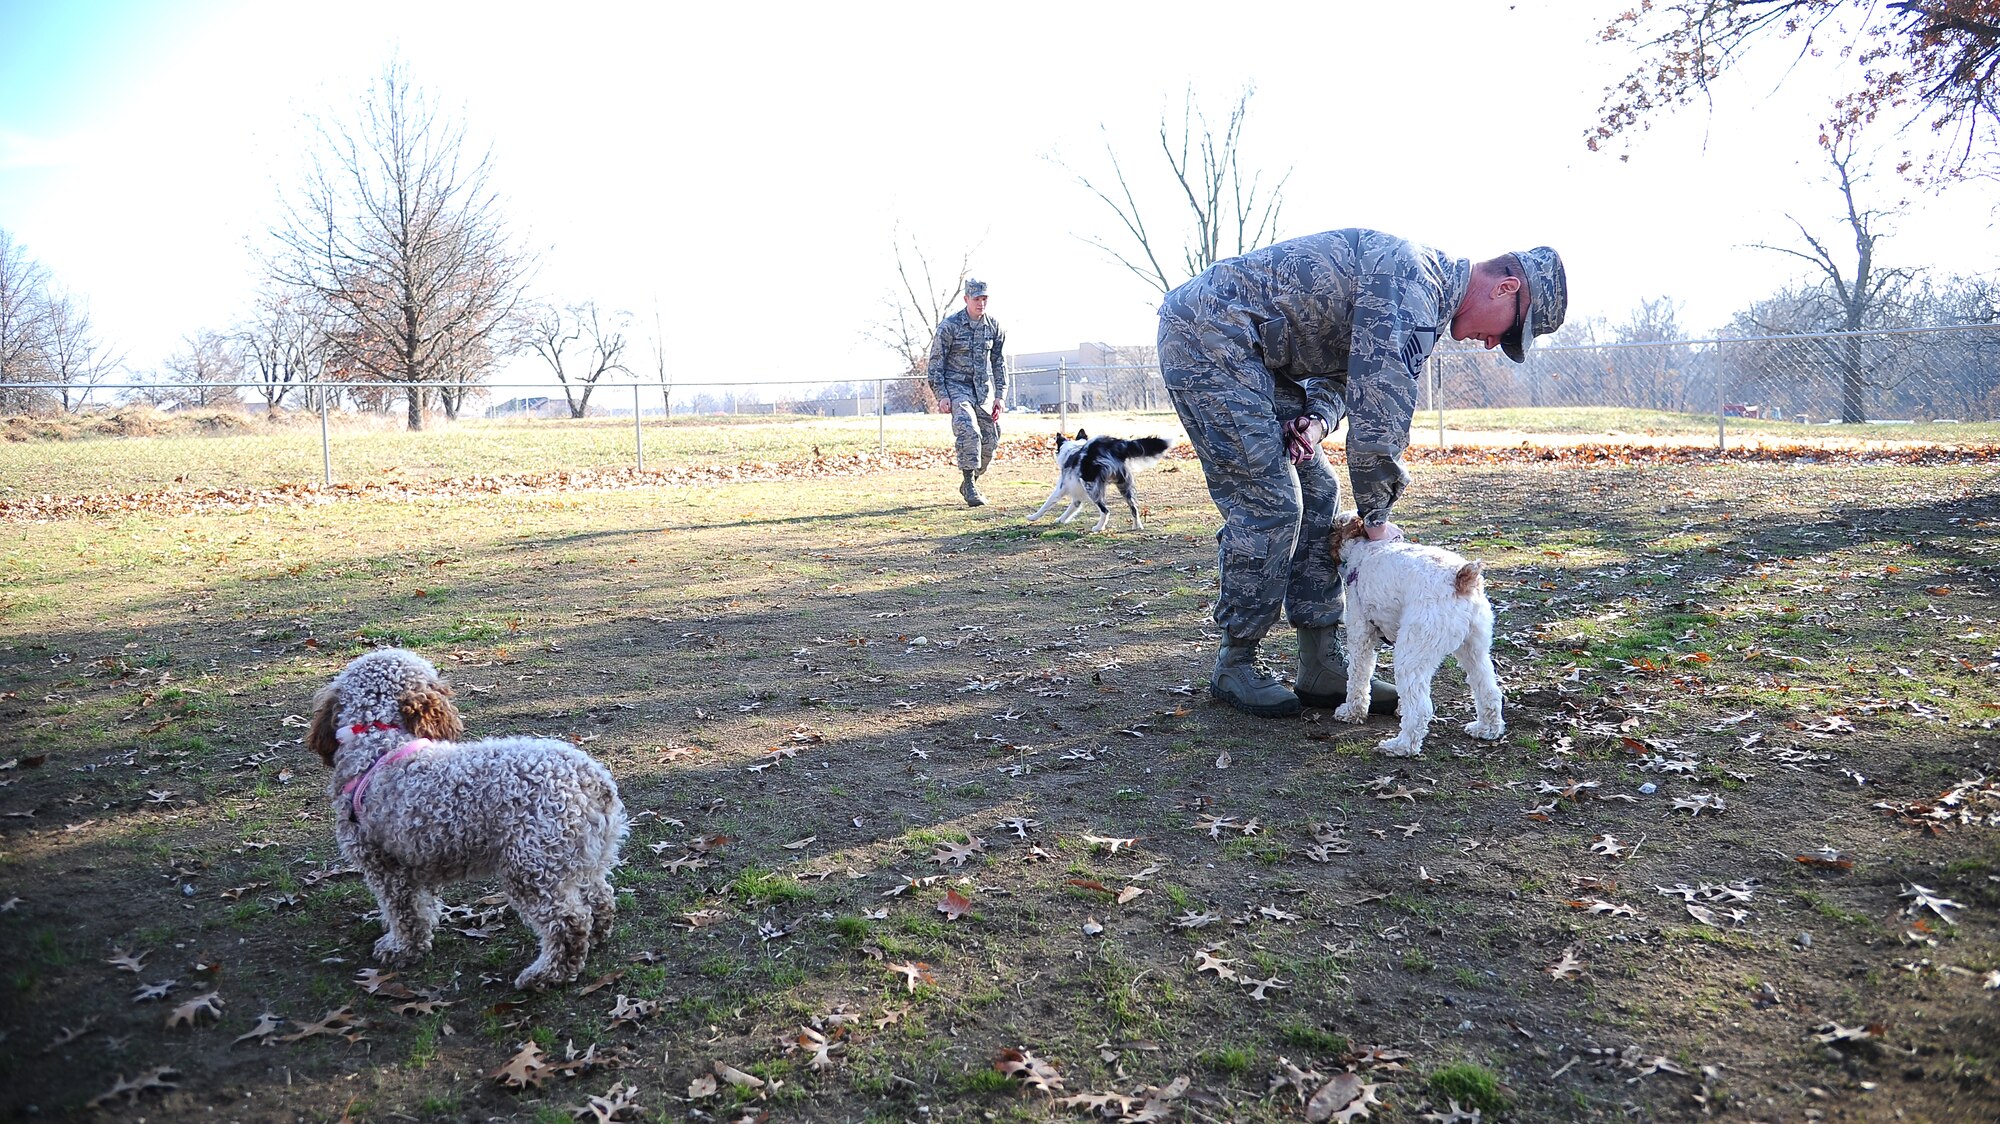 U.S. Air Force Master Sgt. Daniel Lauseng from the 509th Operations Support Squadron plays with his pets at the opening of the Whiteman Dog Park, Dec. 3, 2013, at Whiteman Air Force Base, Mo. The park is open to all puppies at least 4 months old.  (U.S. Air Force photo by Staff Sgt. Brigitte N. Brantley/Released)